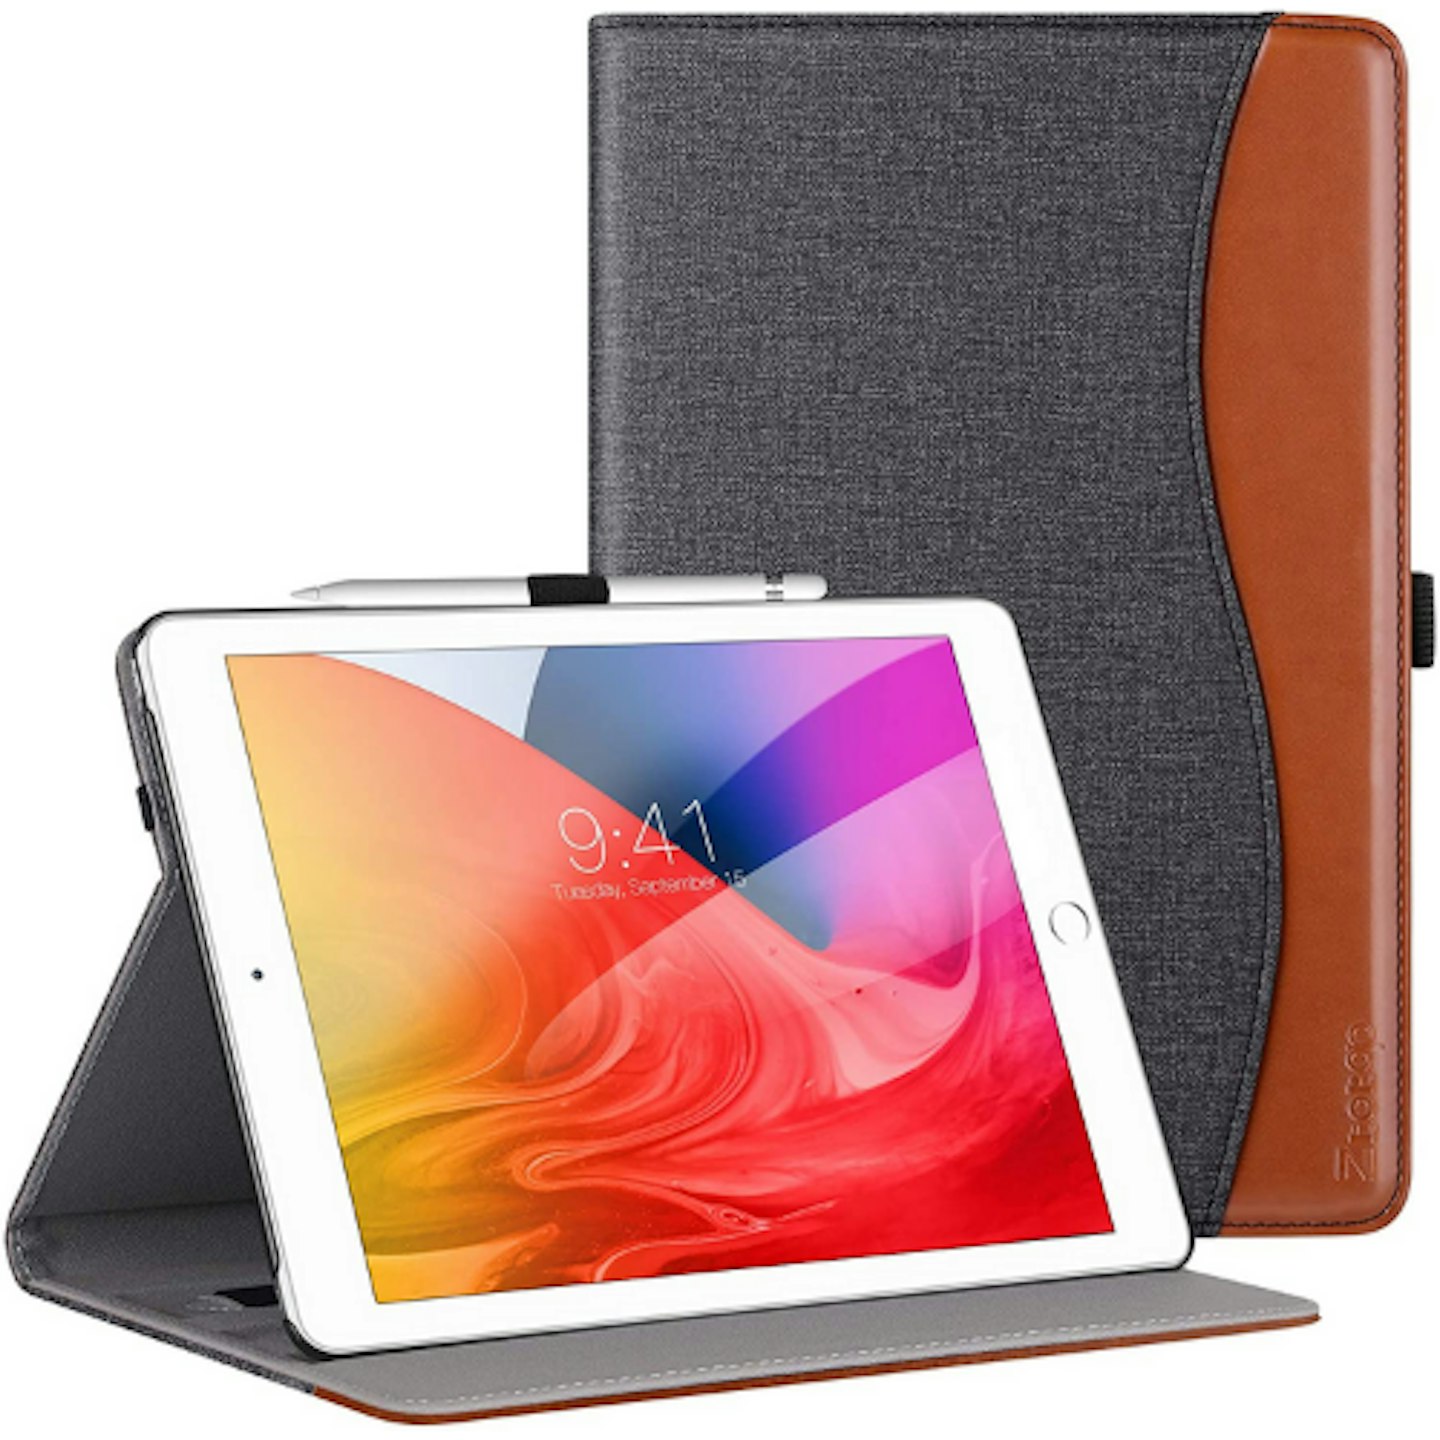 Ztotops Case for New iPad 10.2 inch